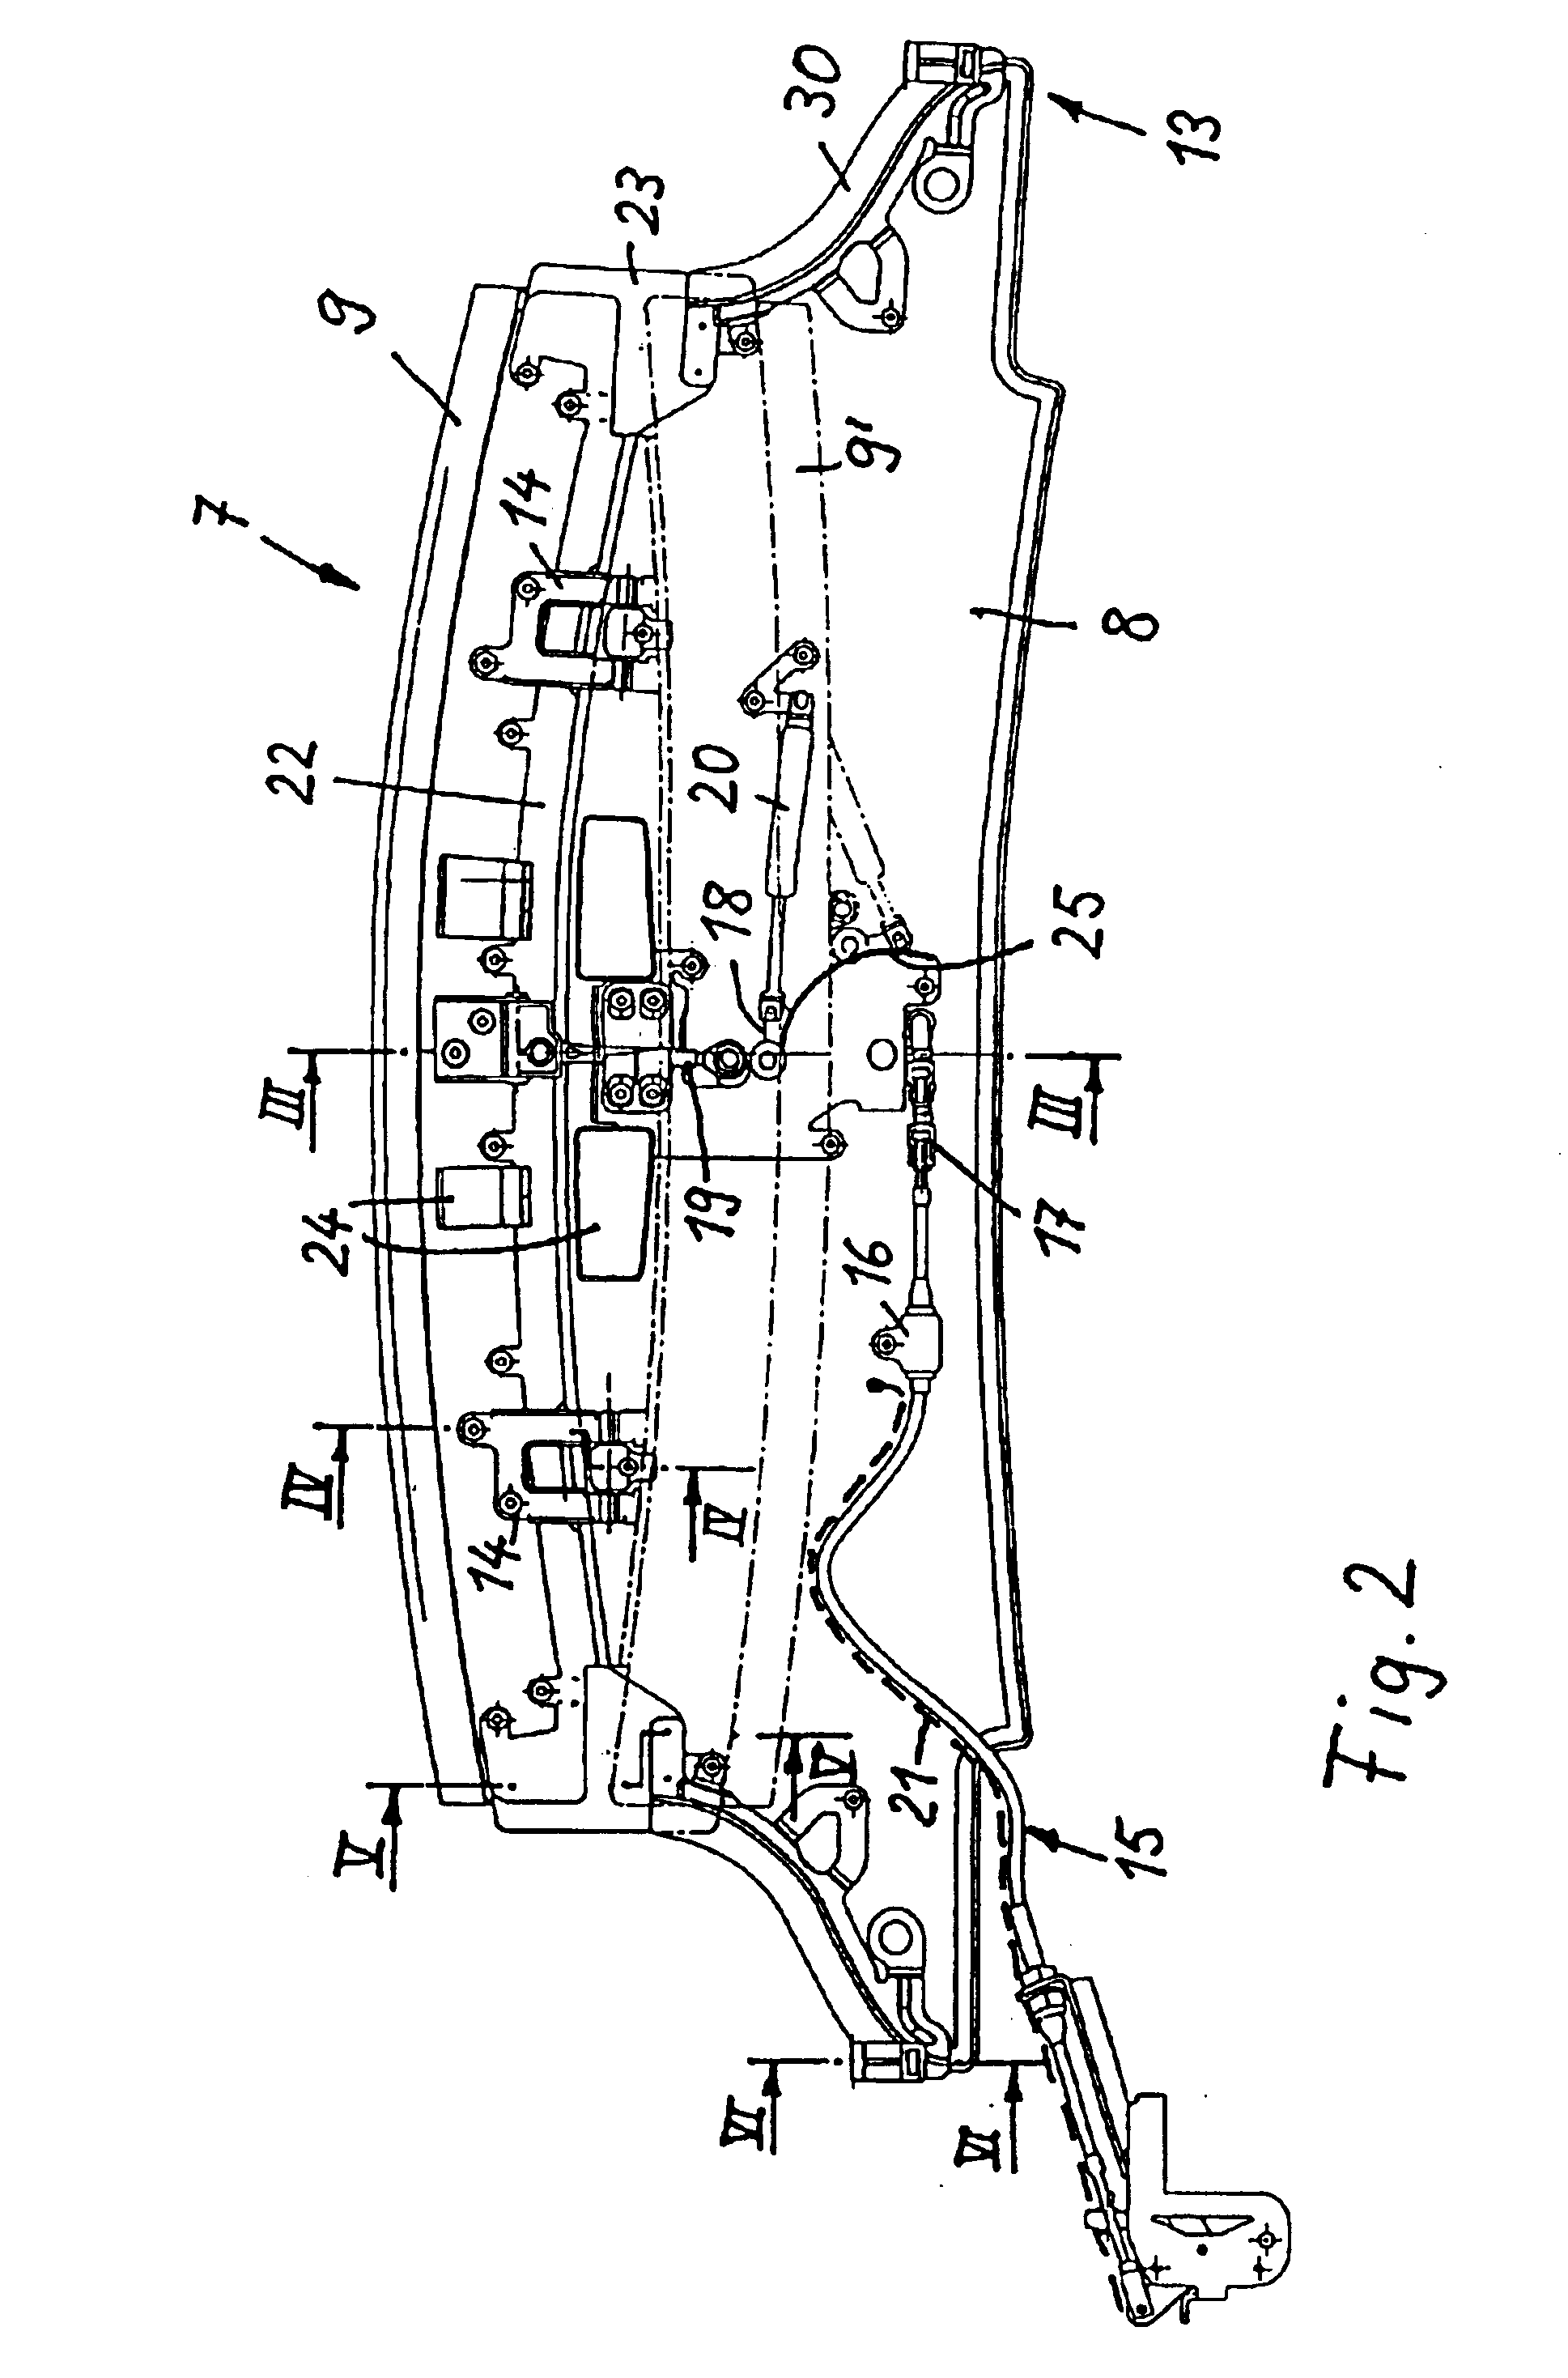 Plate in a motor vehicle with a metallic support structure